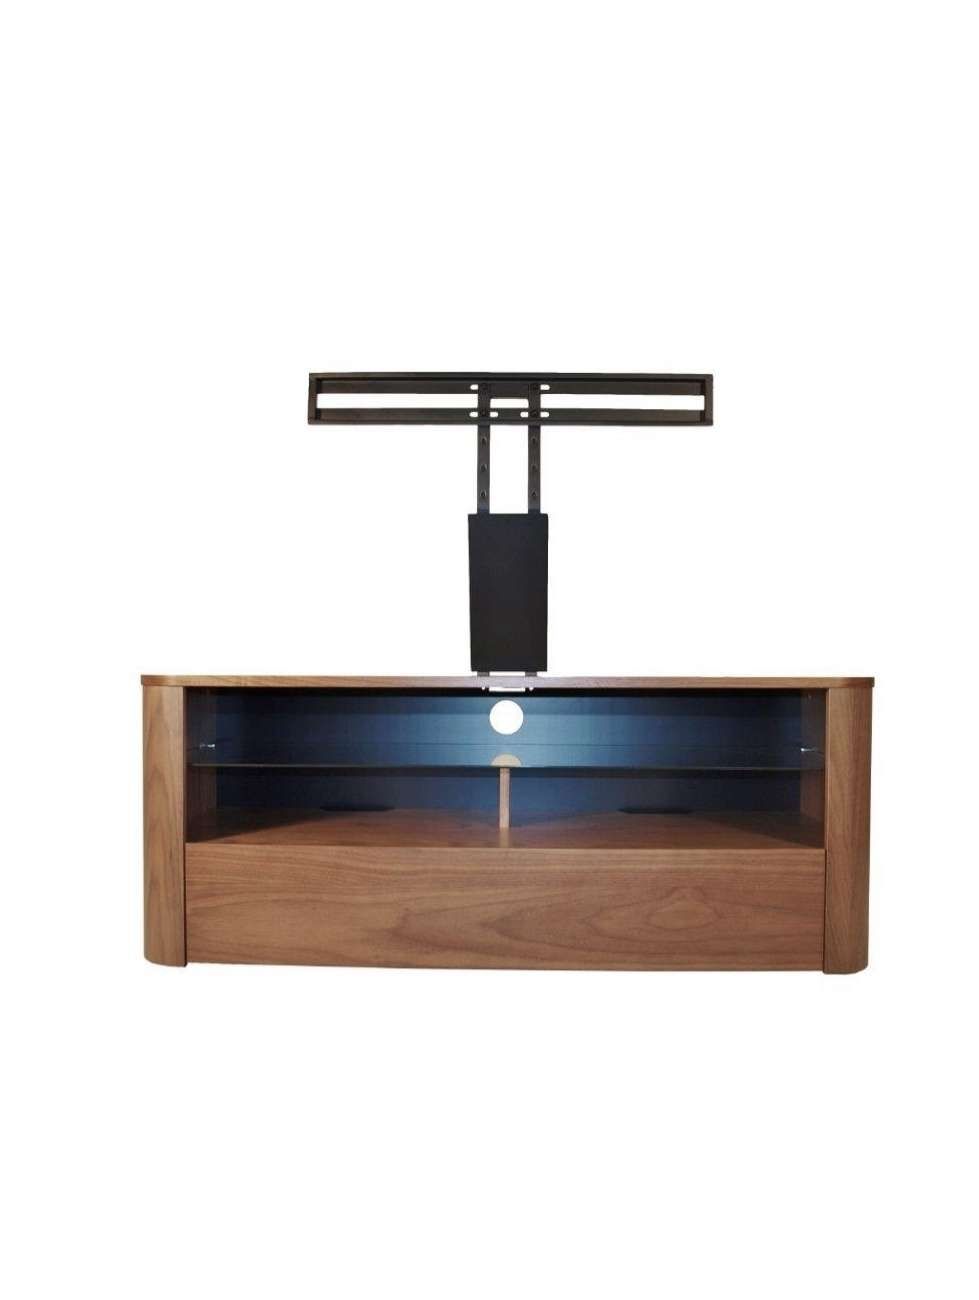 Alphason Hugo Tv Stand Adh1260 Wal Walnut With Bracket | 121 Tv Mounts With Alphason Tv Cabinets (View 1 of 20)